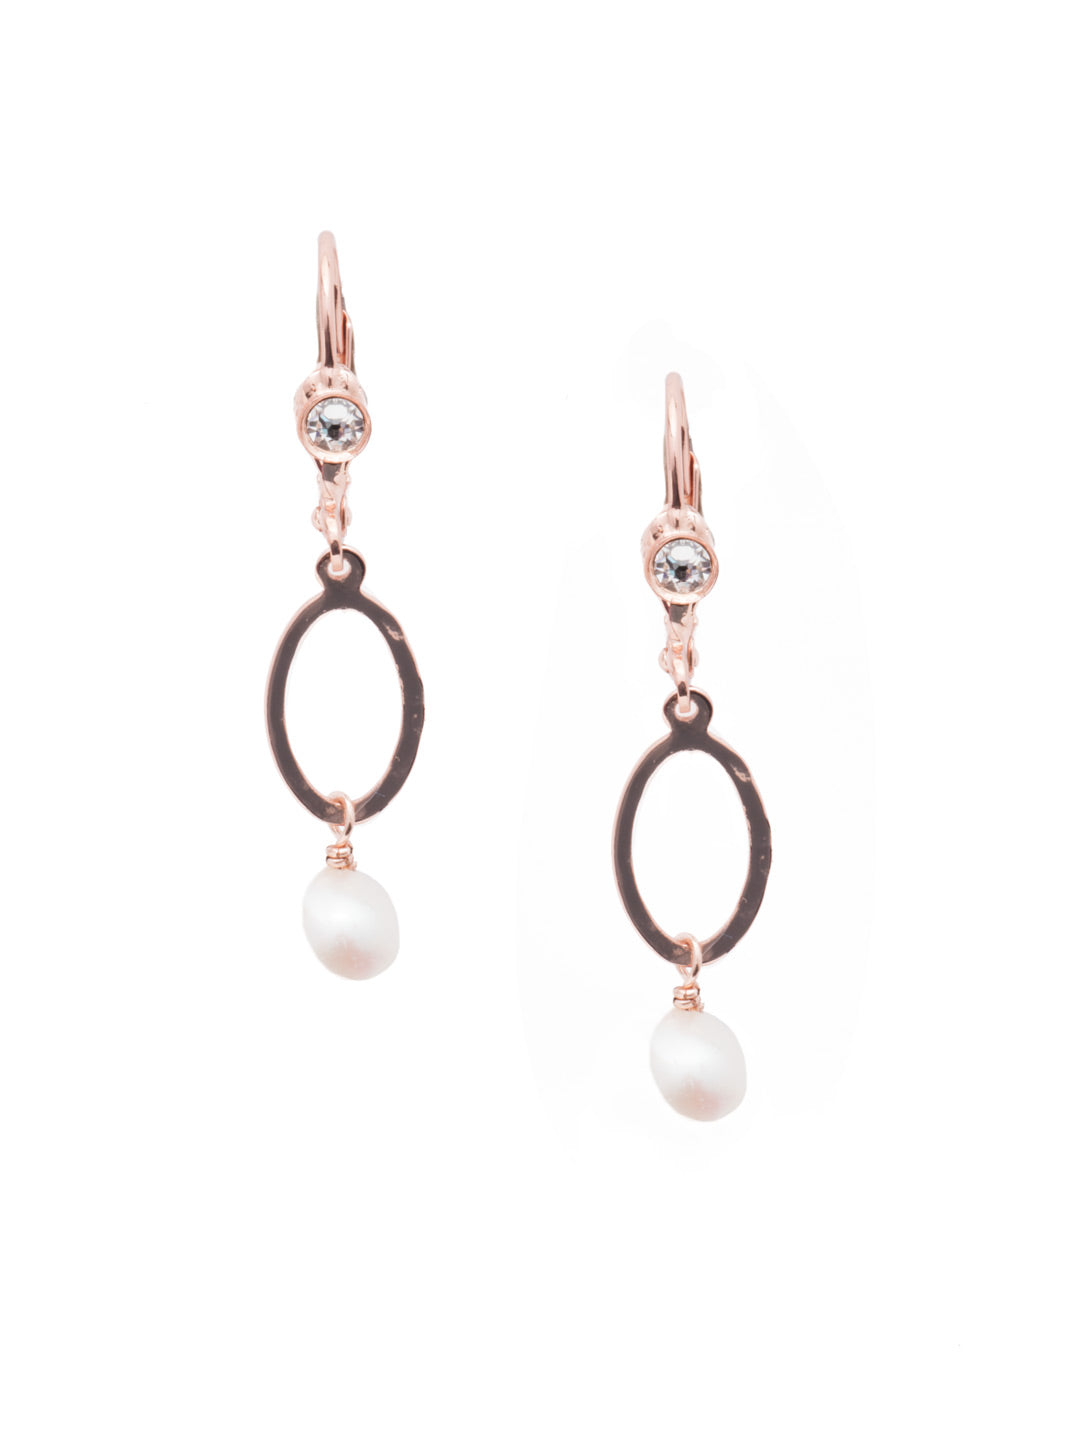 Milana Dangle Earrings - EEC3RGCRY - <p>A delicate pearl drop! These french wire earrings feature an open metal oval and timeless hanging pearl. From Sorrelli's Crystal collection in our Rose Gold-tone finish.</p>